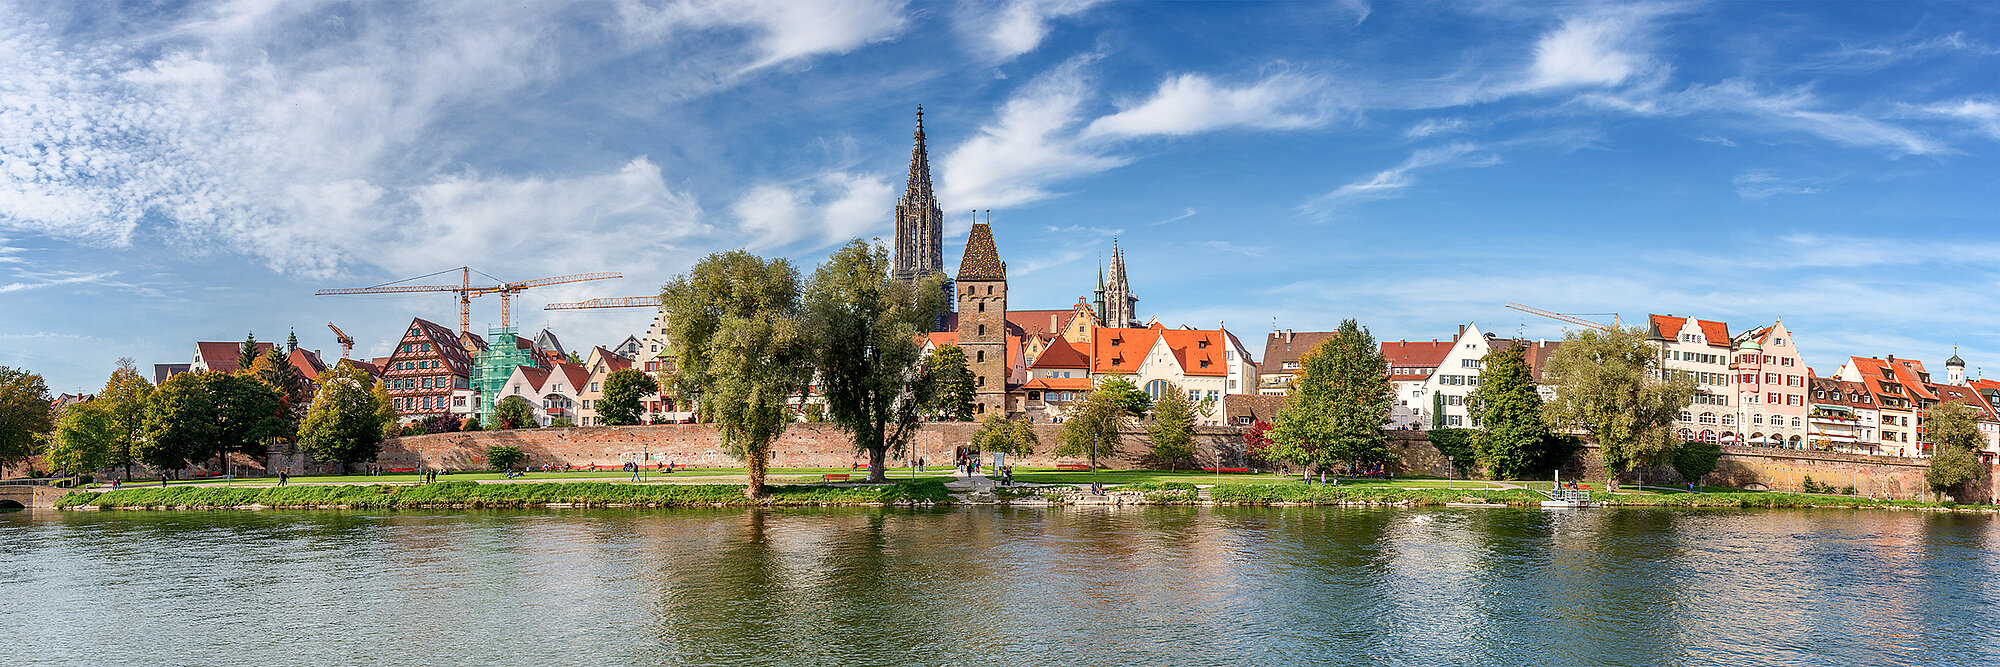 Cityscape of Ulm with rivers, a church tower, houses and trees